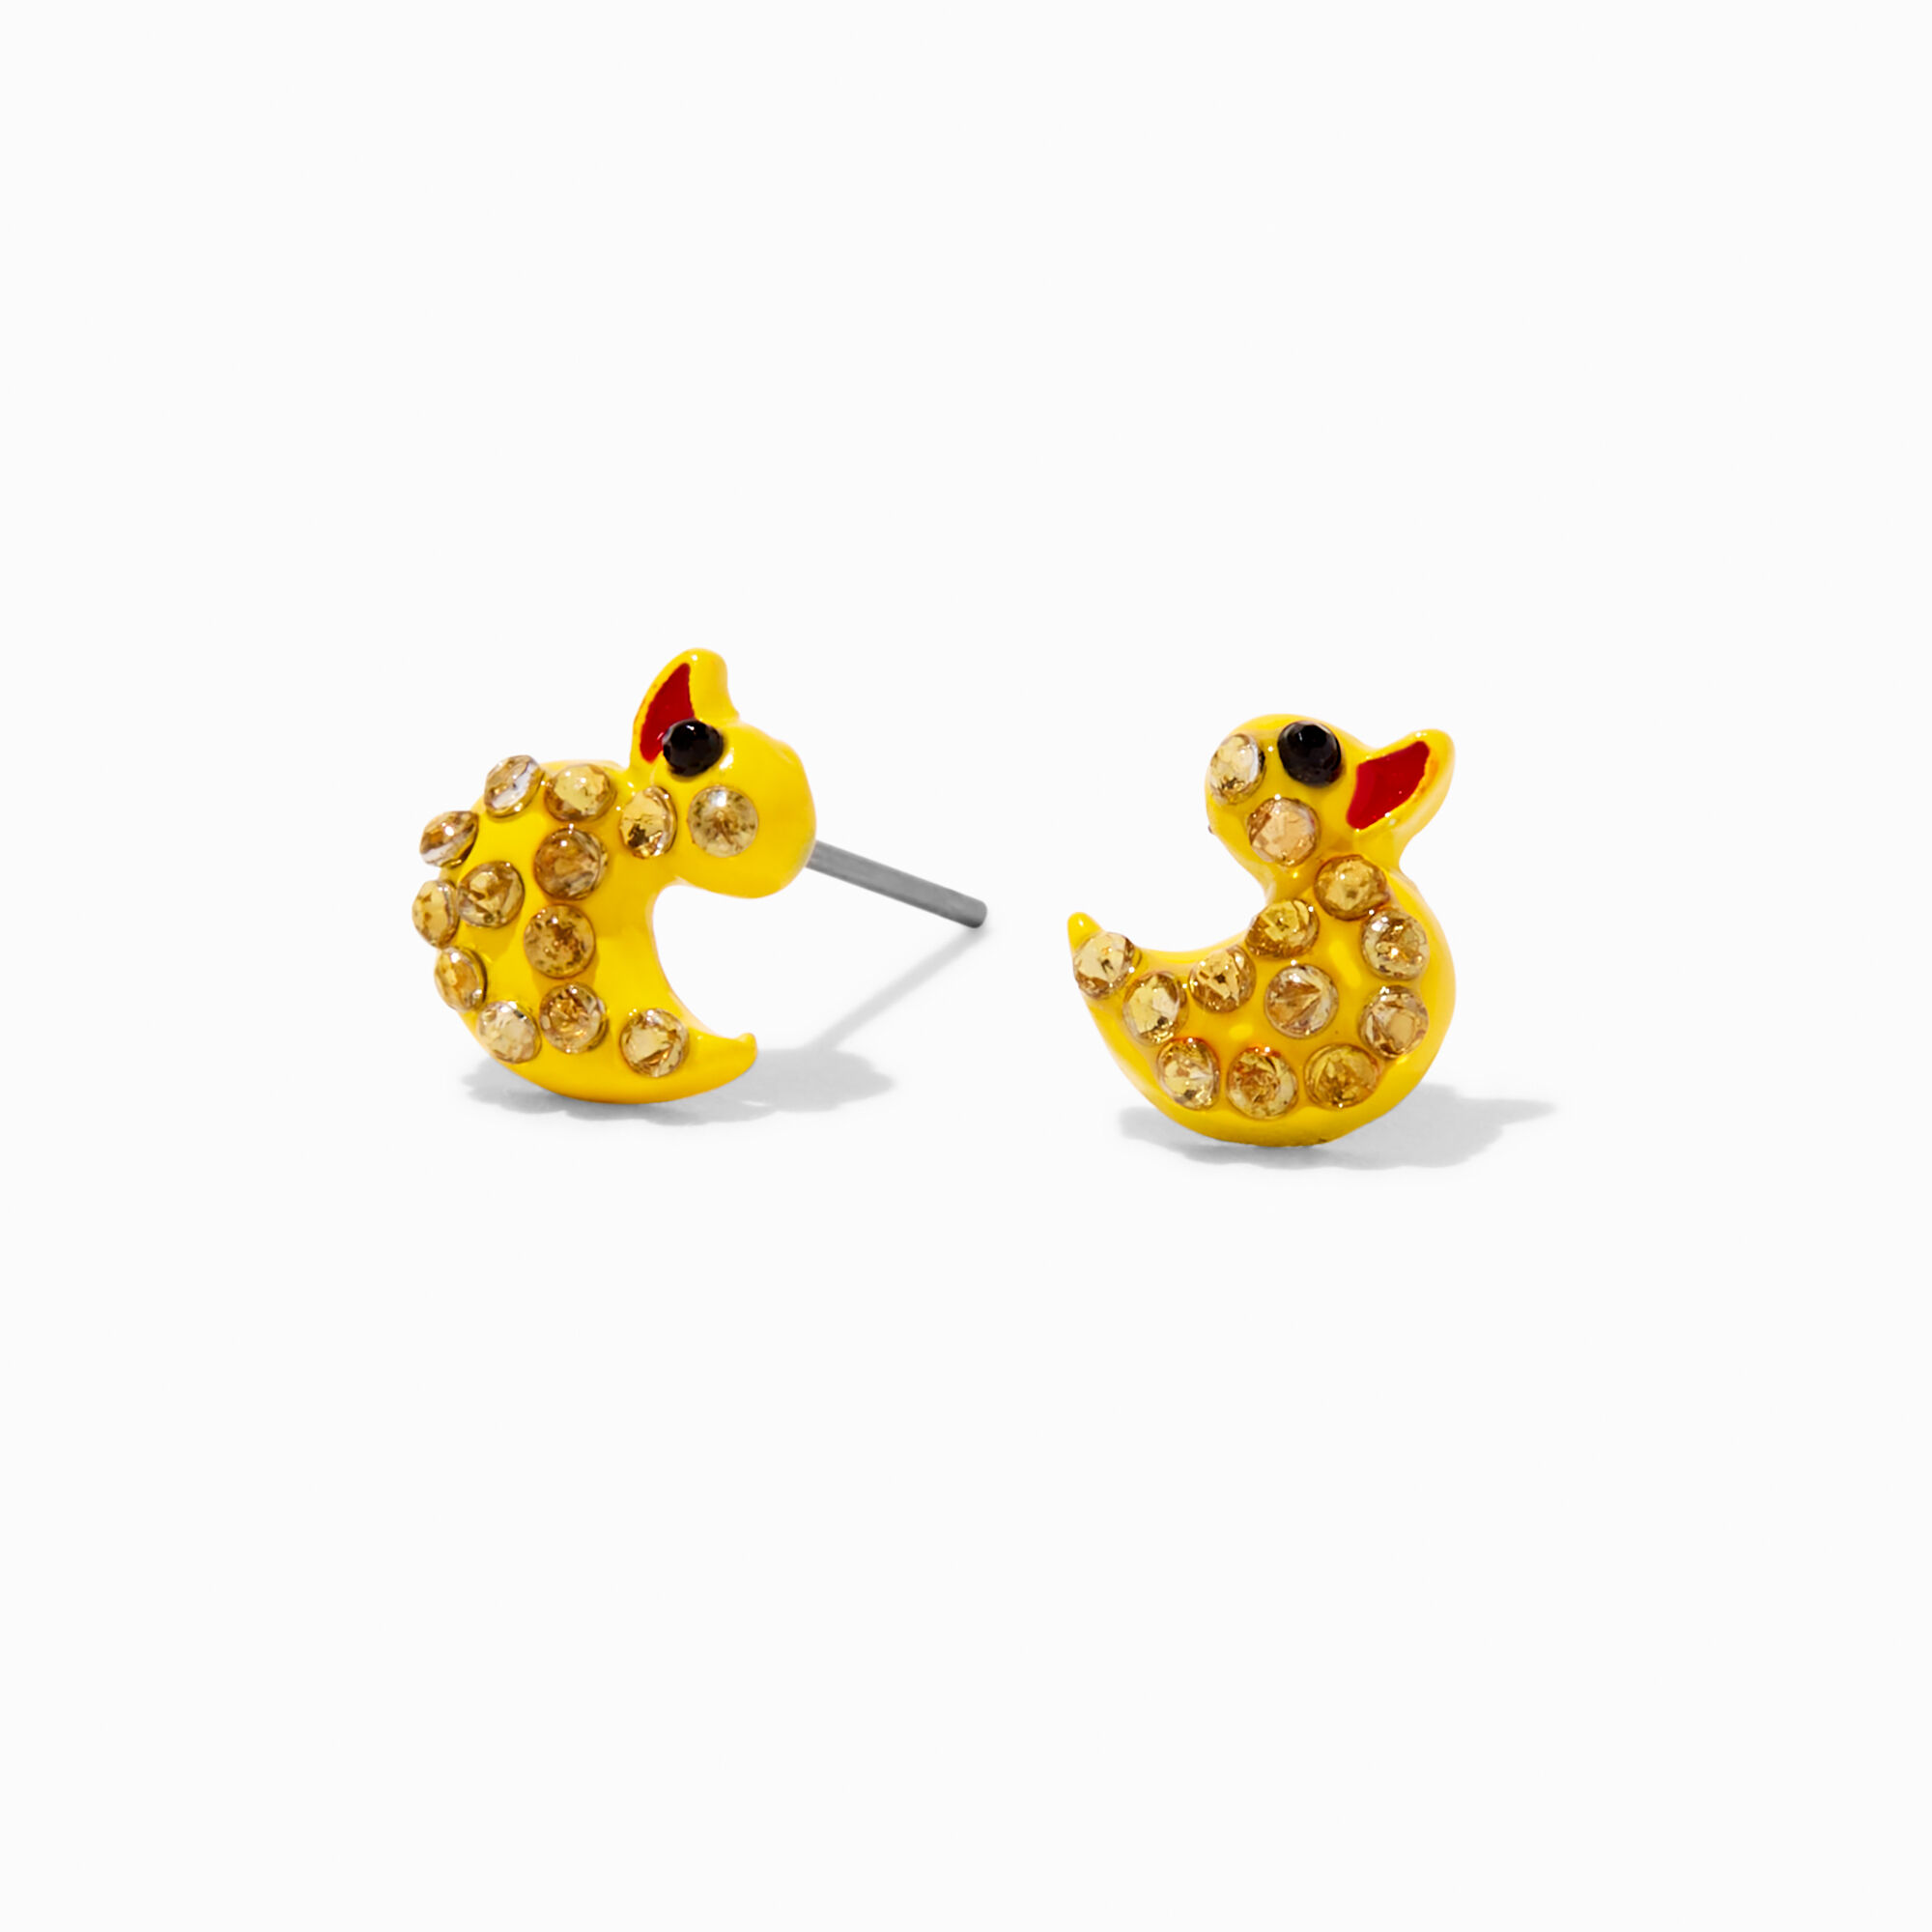 View Claires Crystal Rubber Ducky Stud Earrings Yellow information